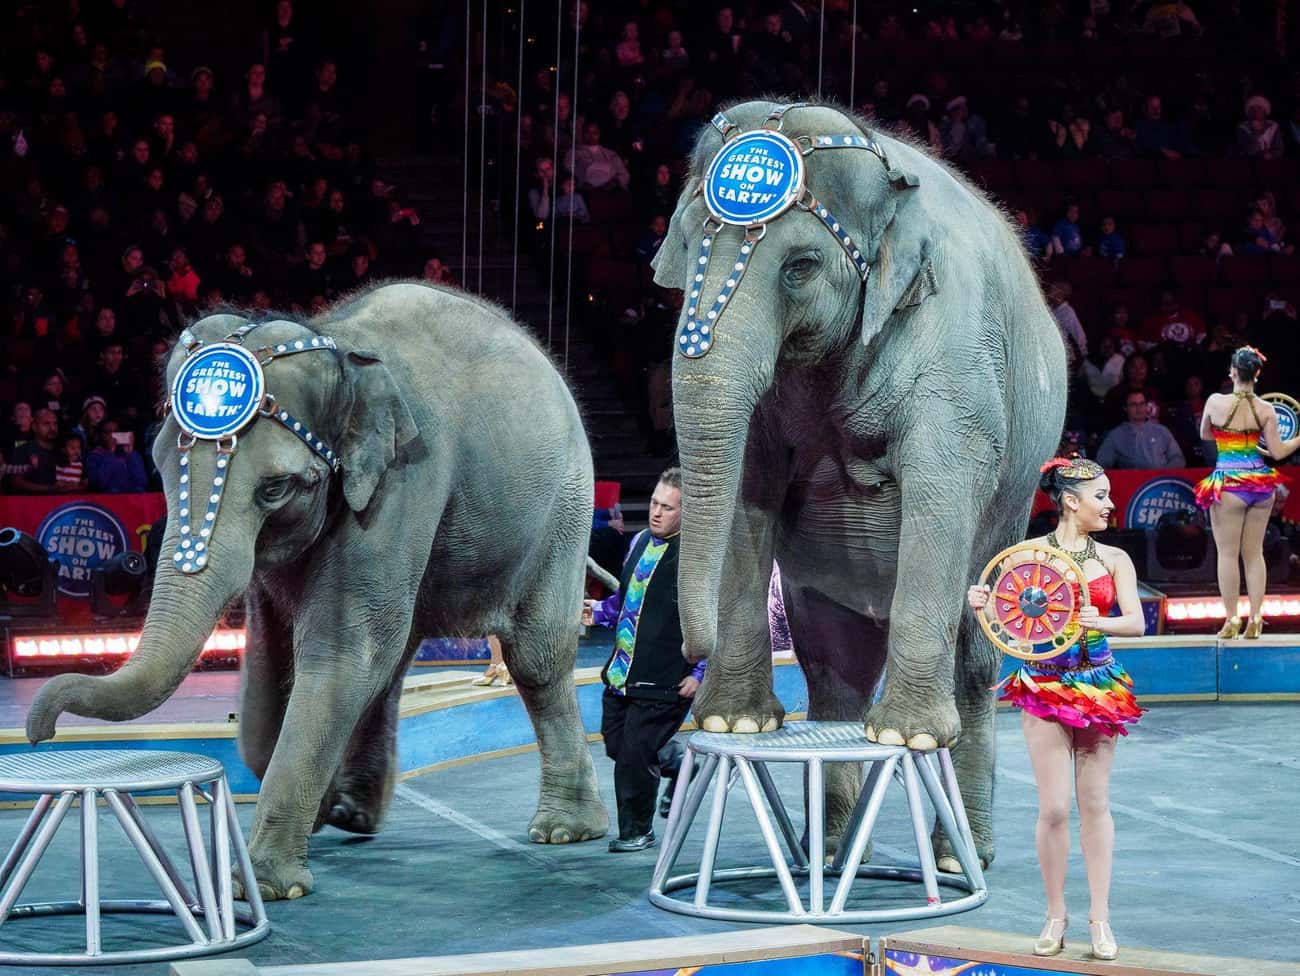 Ringling Bros. And Barnum & Bailey Circus Retired Elephants After Activist Protests And Numerous Cities Banned Their Performances